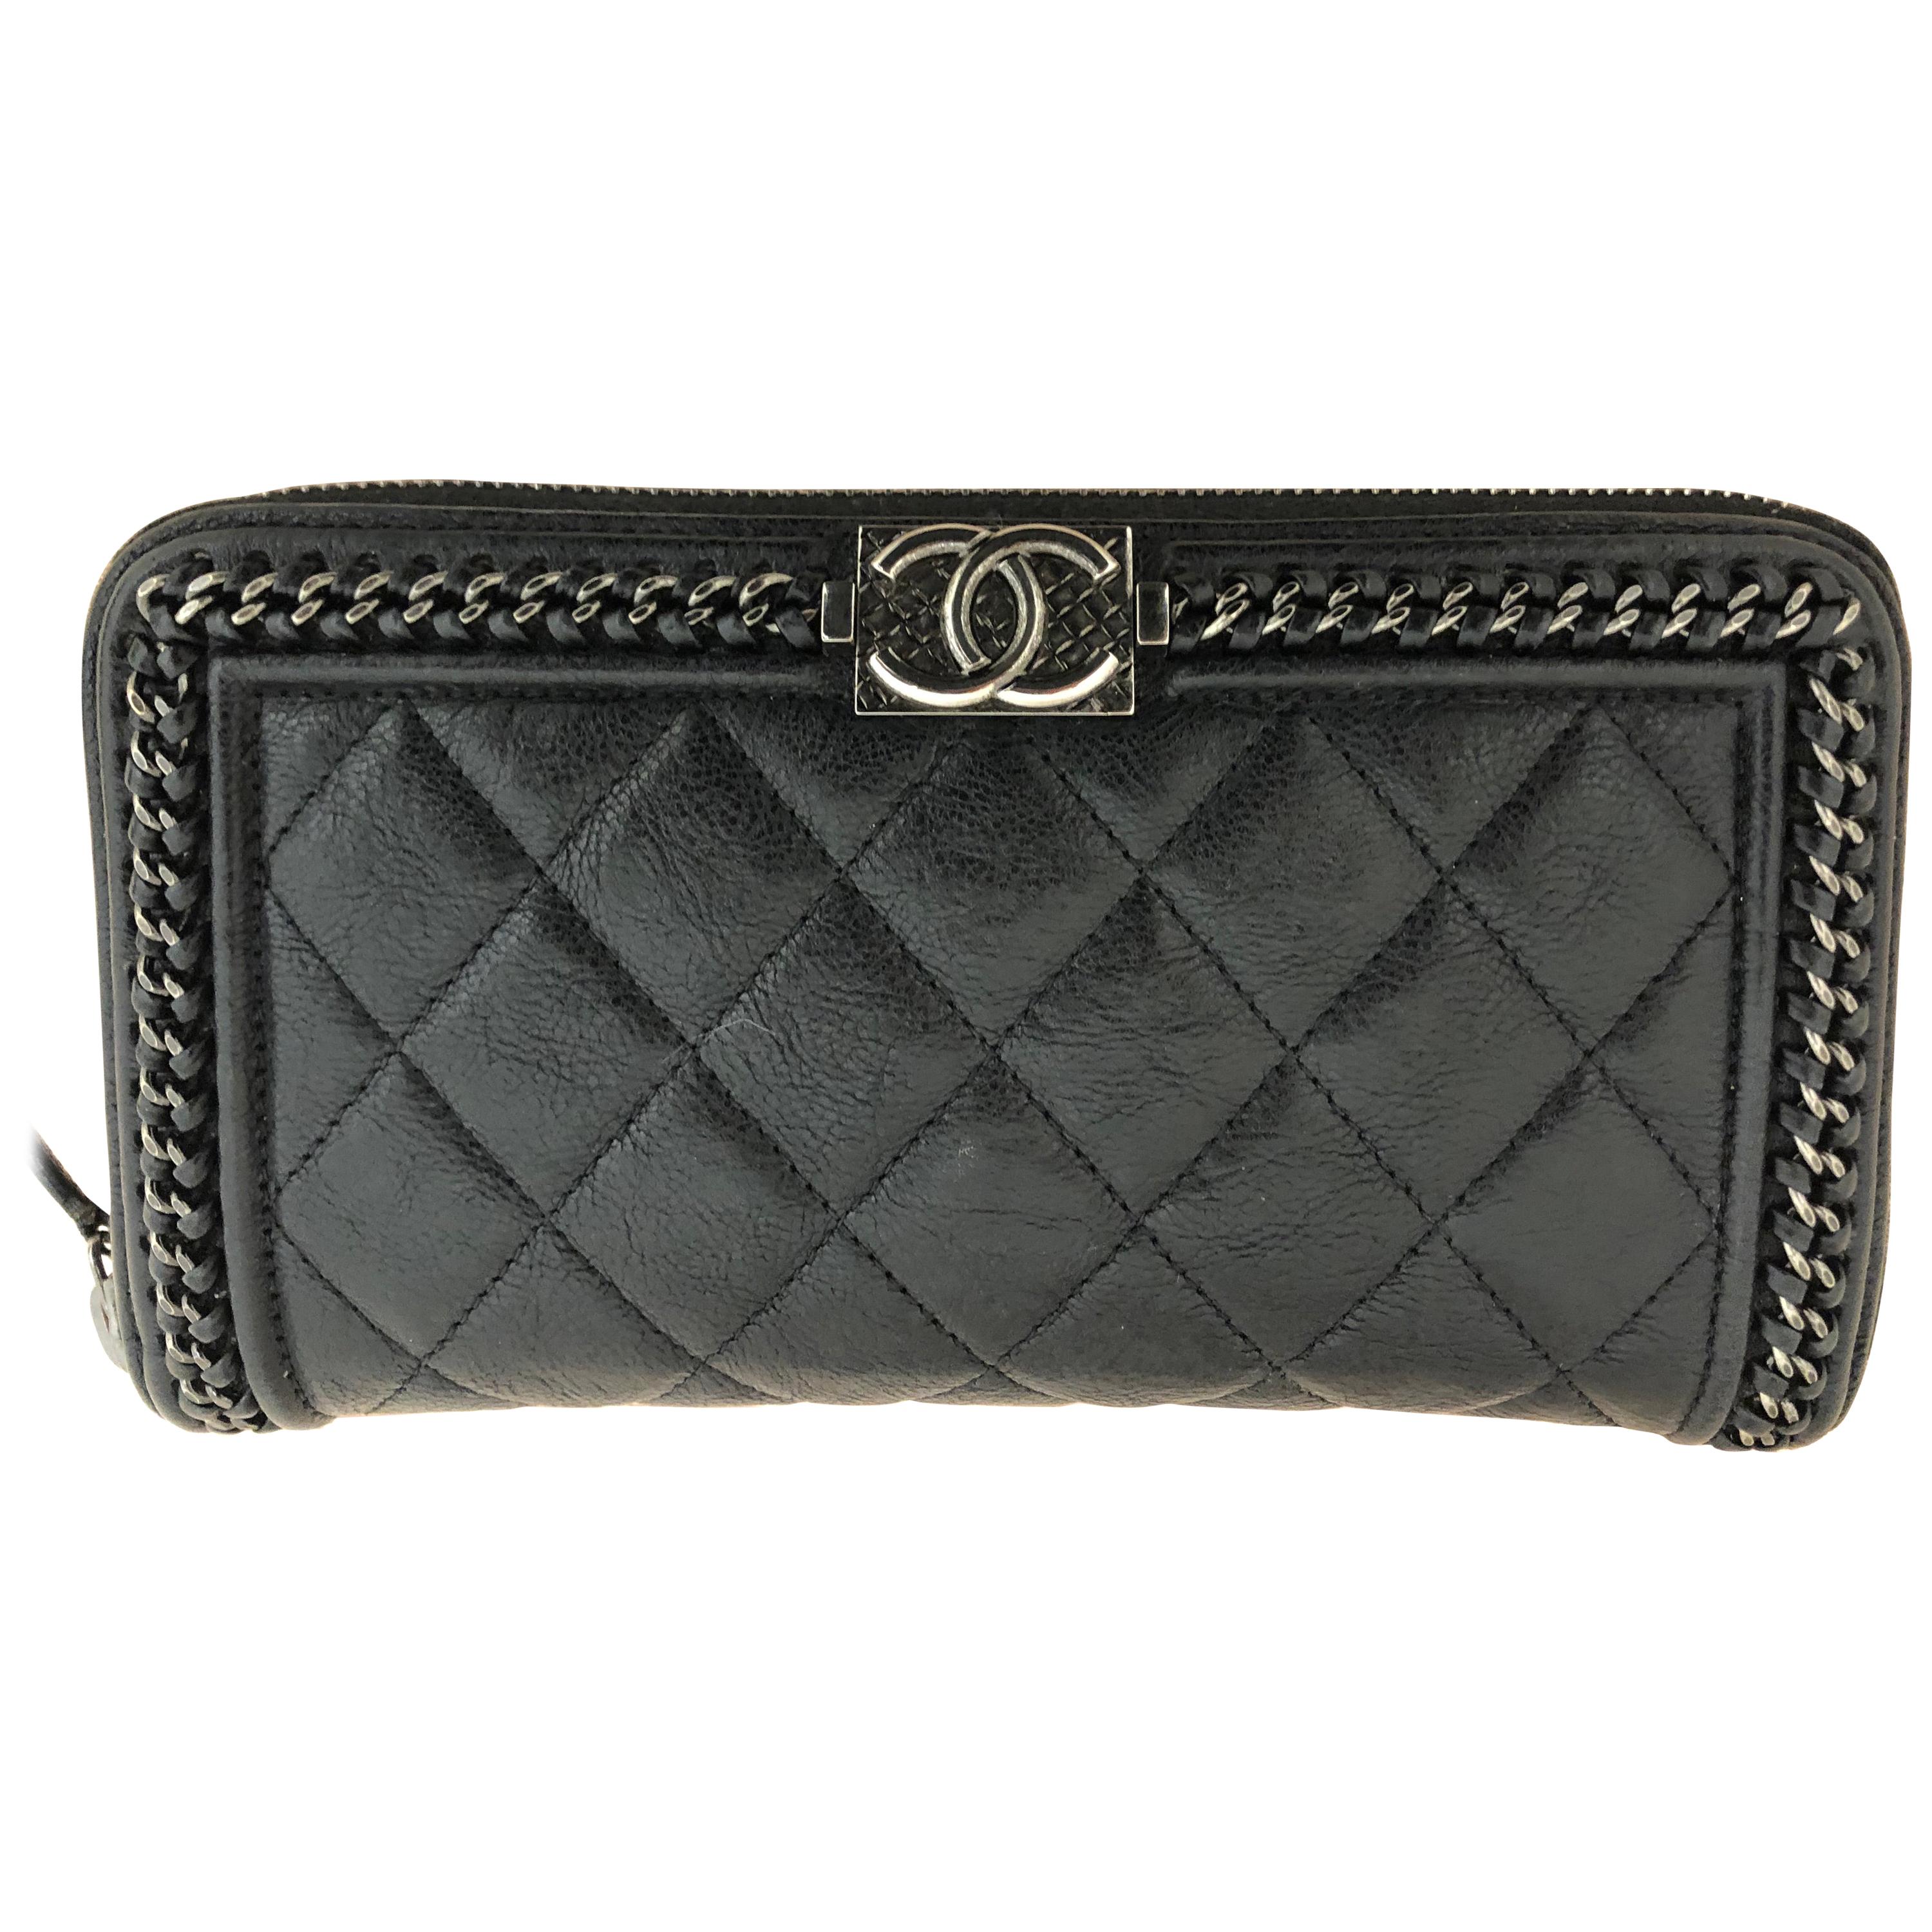 Lot - CHANEL Clutch bag in blue quilted leather (limited edition - Geneva)